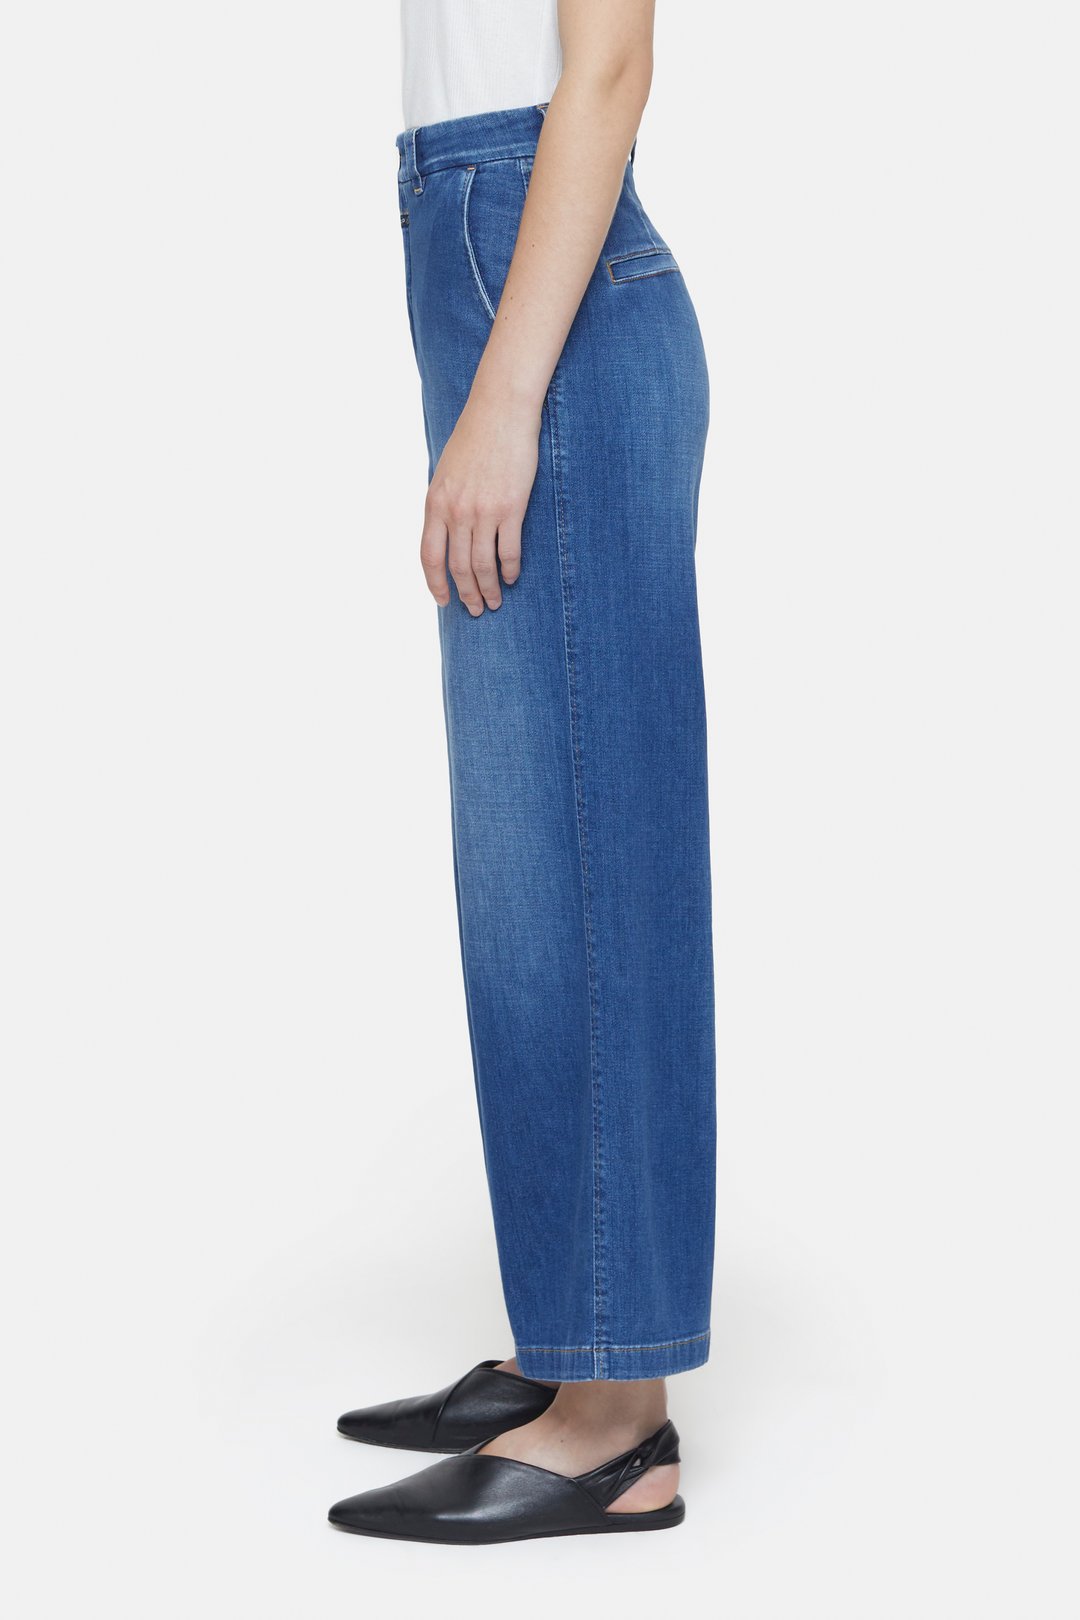 WIDE JEANS - STYLE CLOSED | NAME BARTON